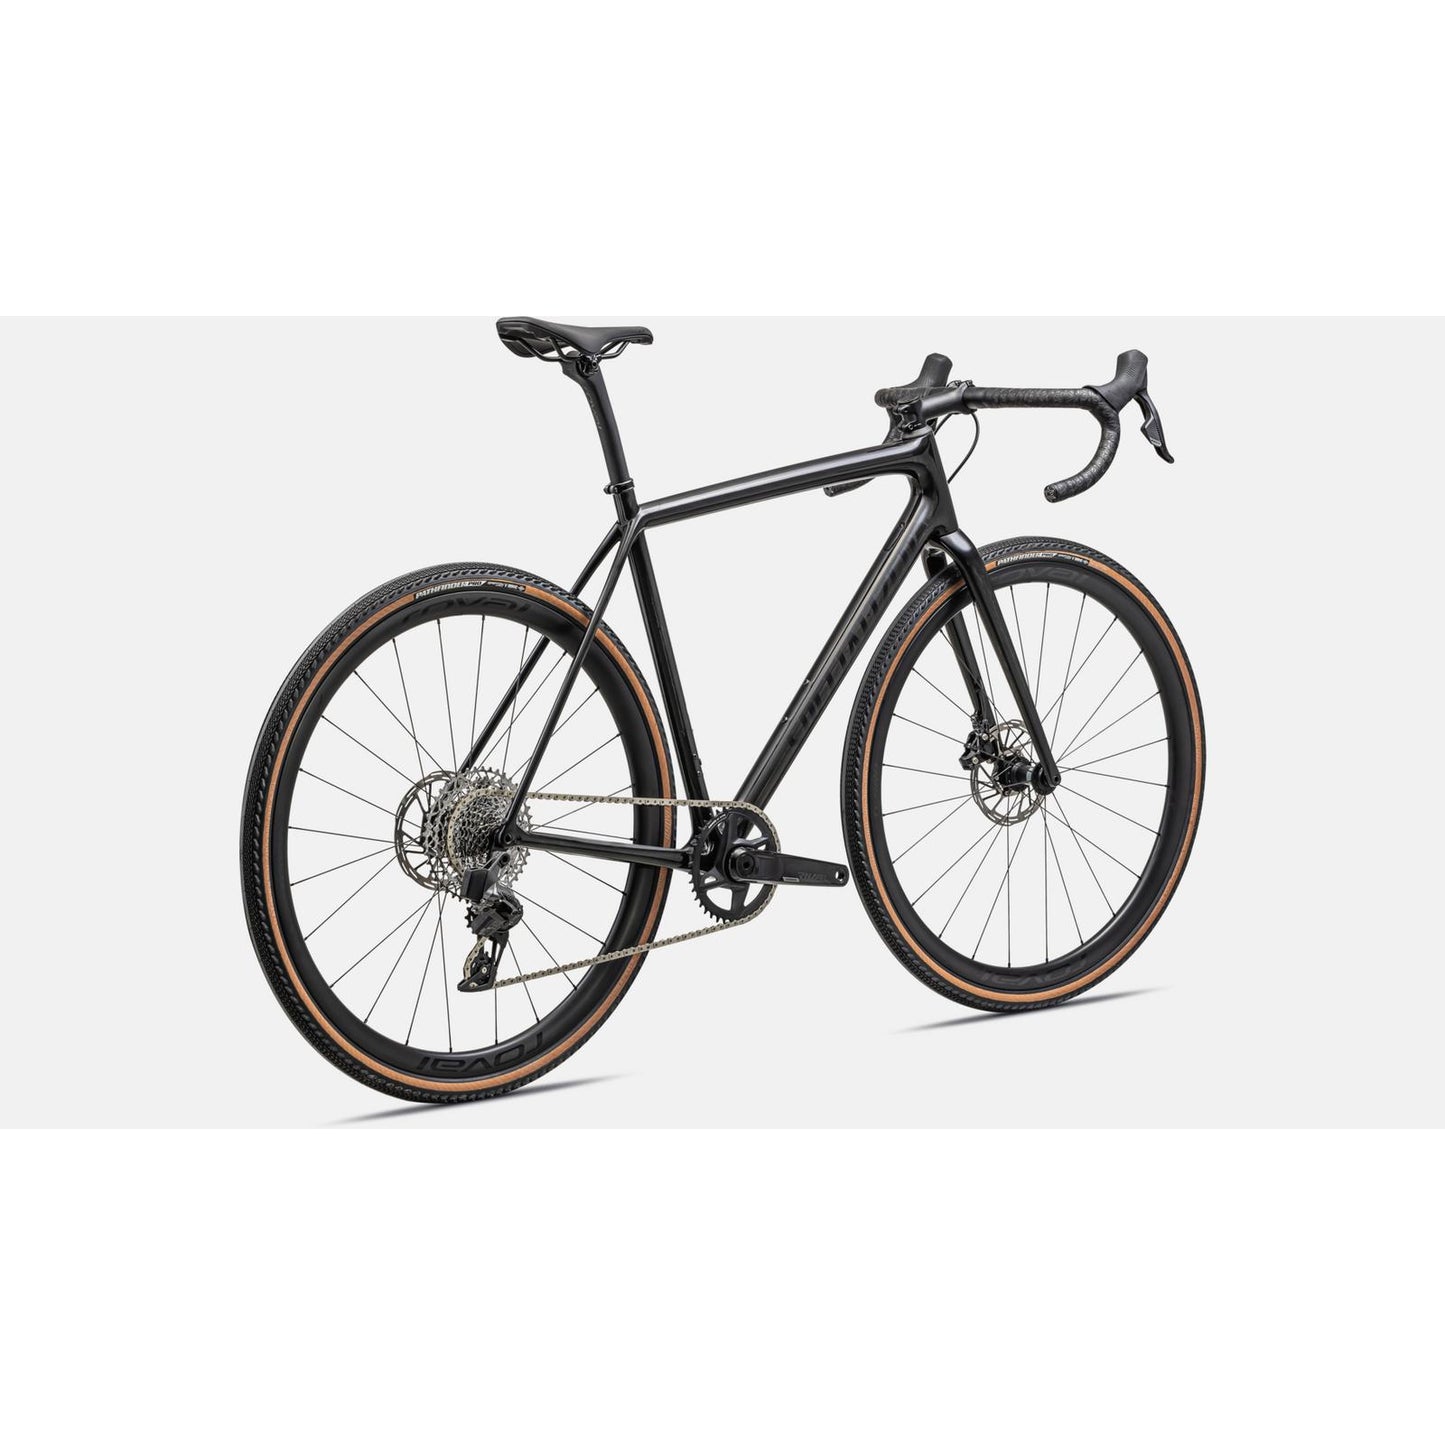 Specialized Crux Expert Gravel Road Bike - Bikes - Bicycle Warehouse